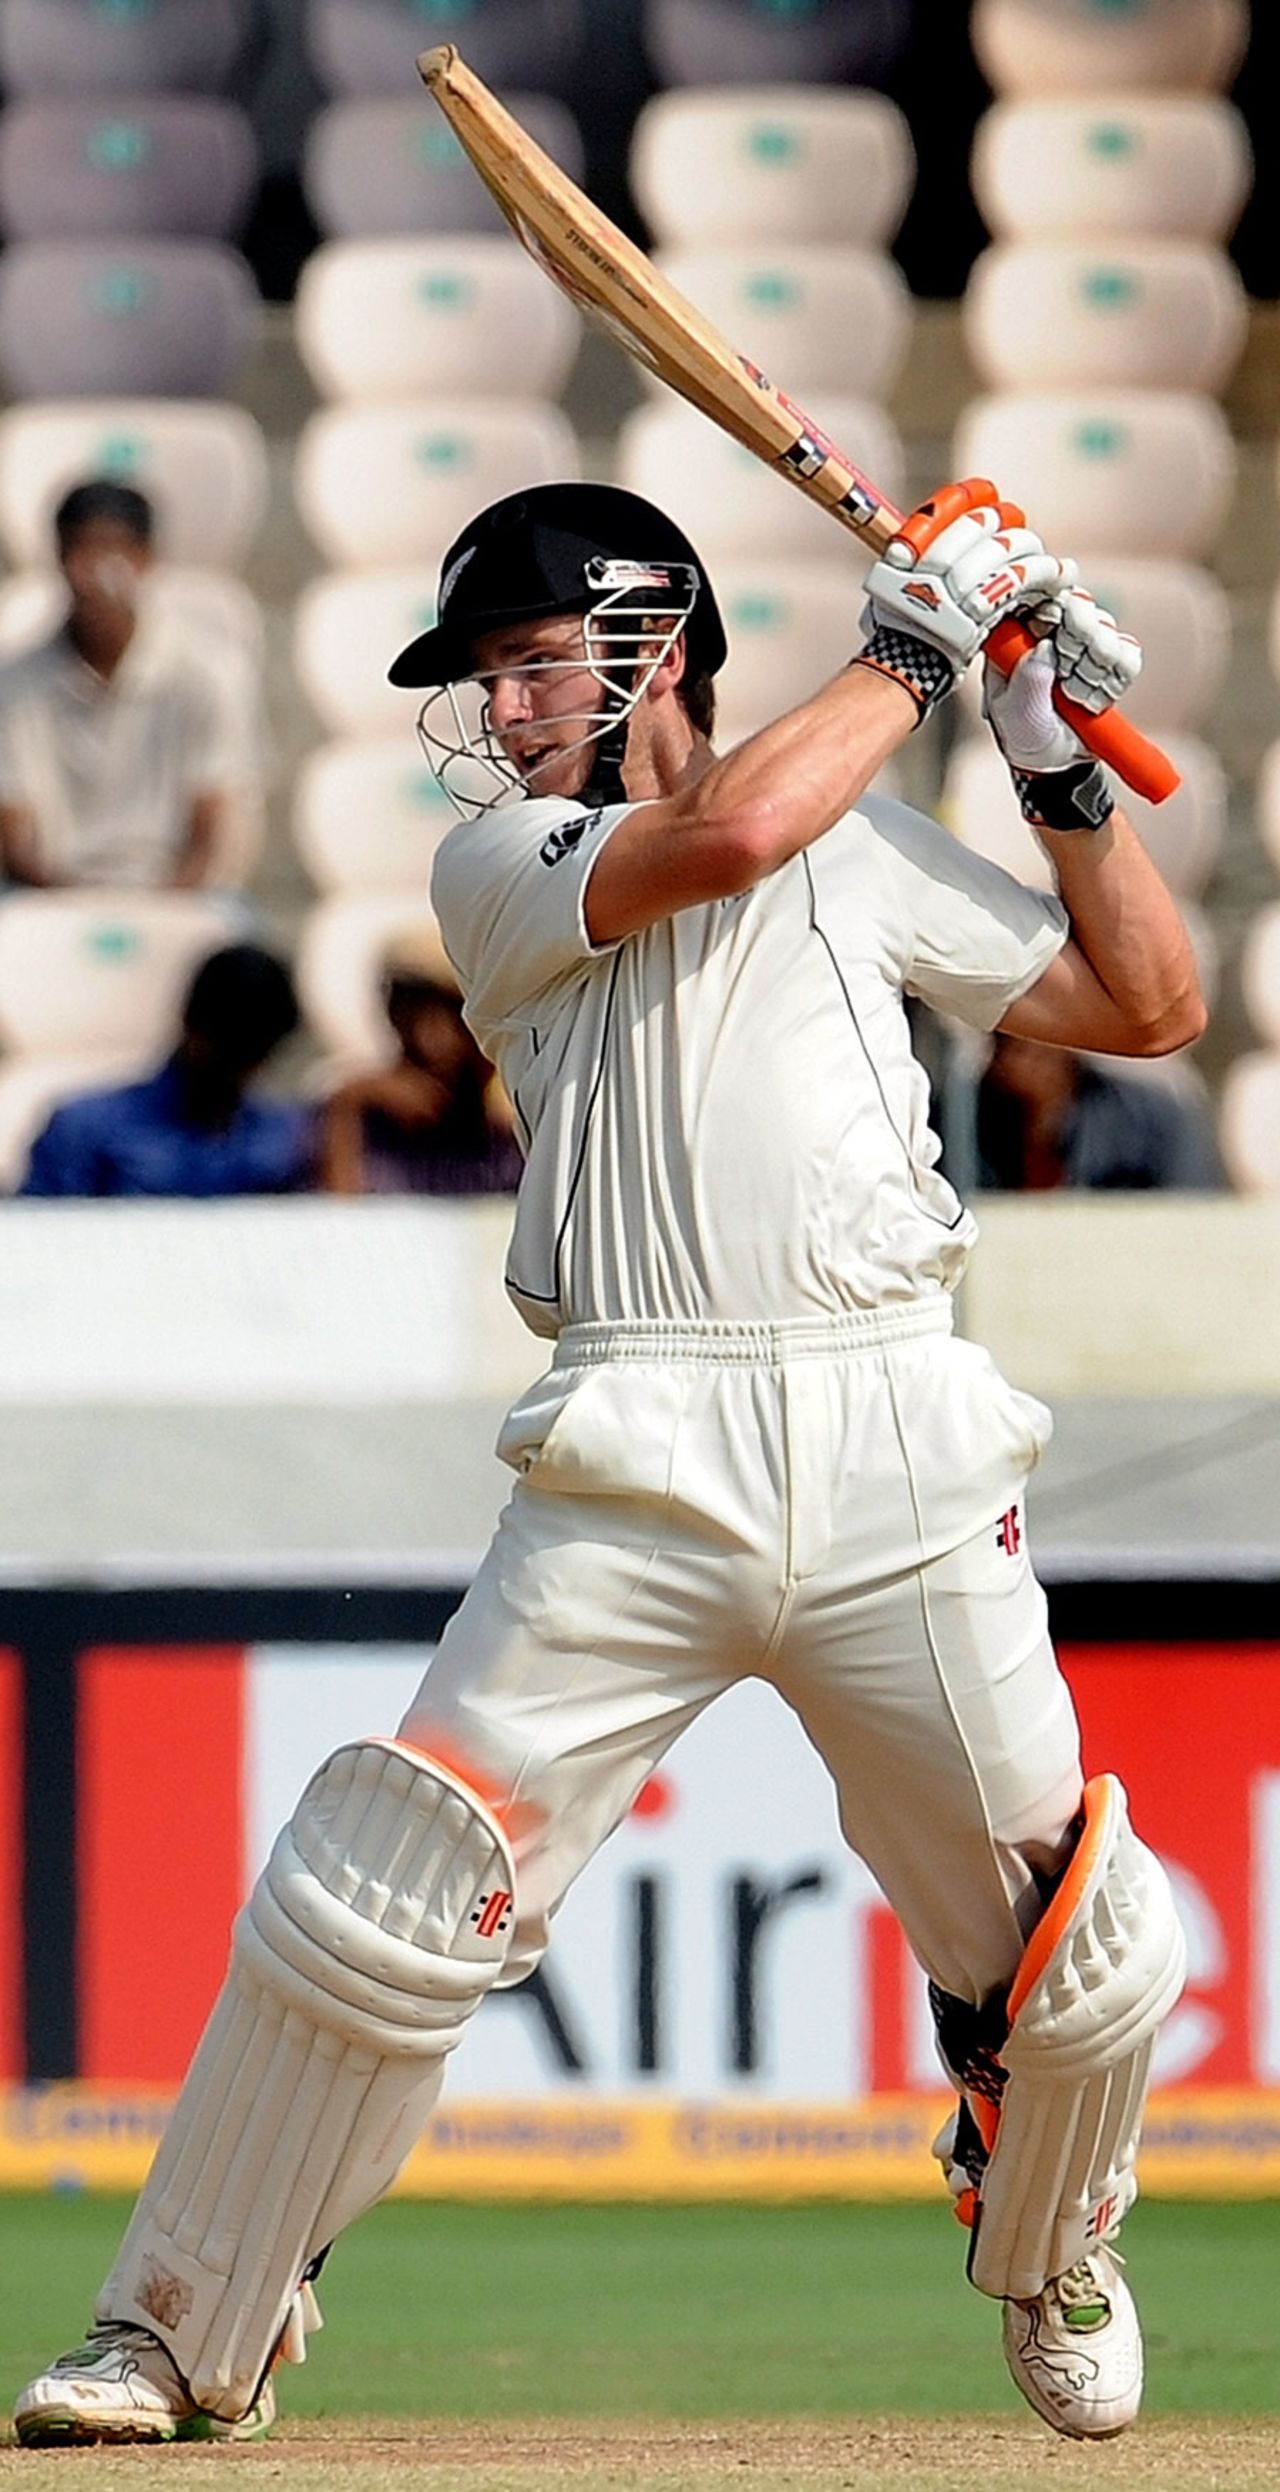 Kane Williamson hits one of several back-foot shots through the off side, India v New Zealand, 2nd Test, Hyderabad, 5th day, November 16, 2010